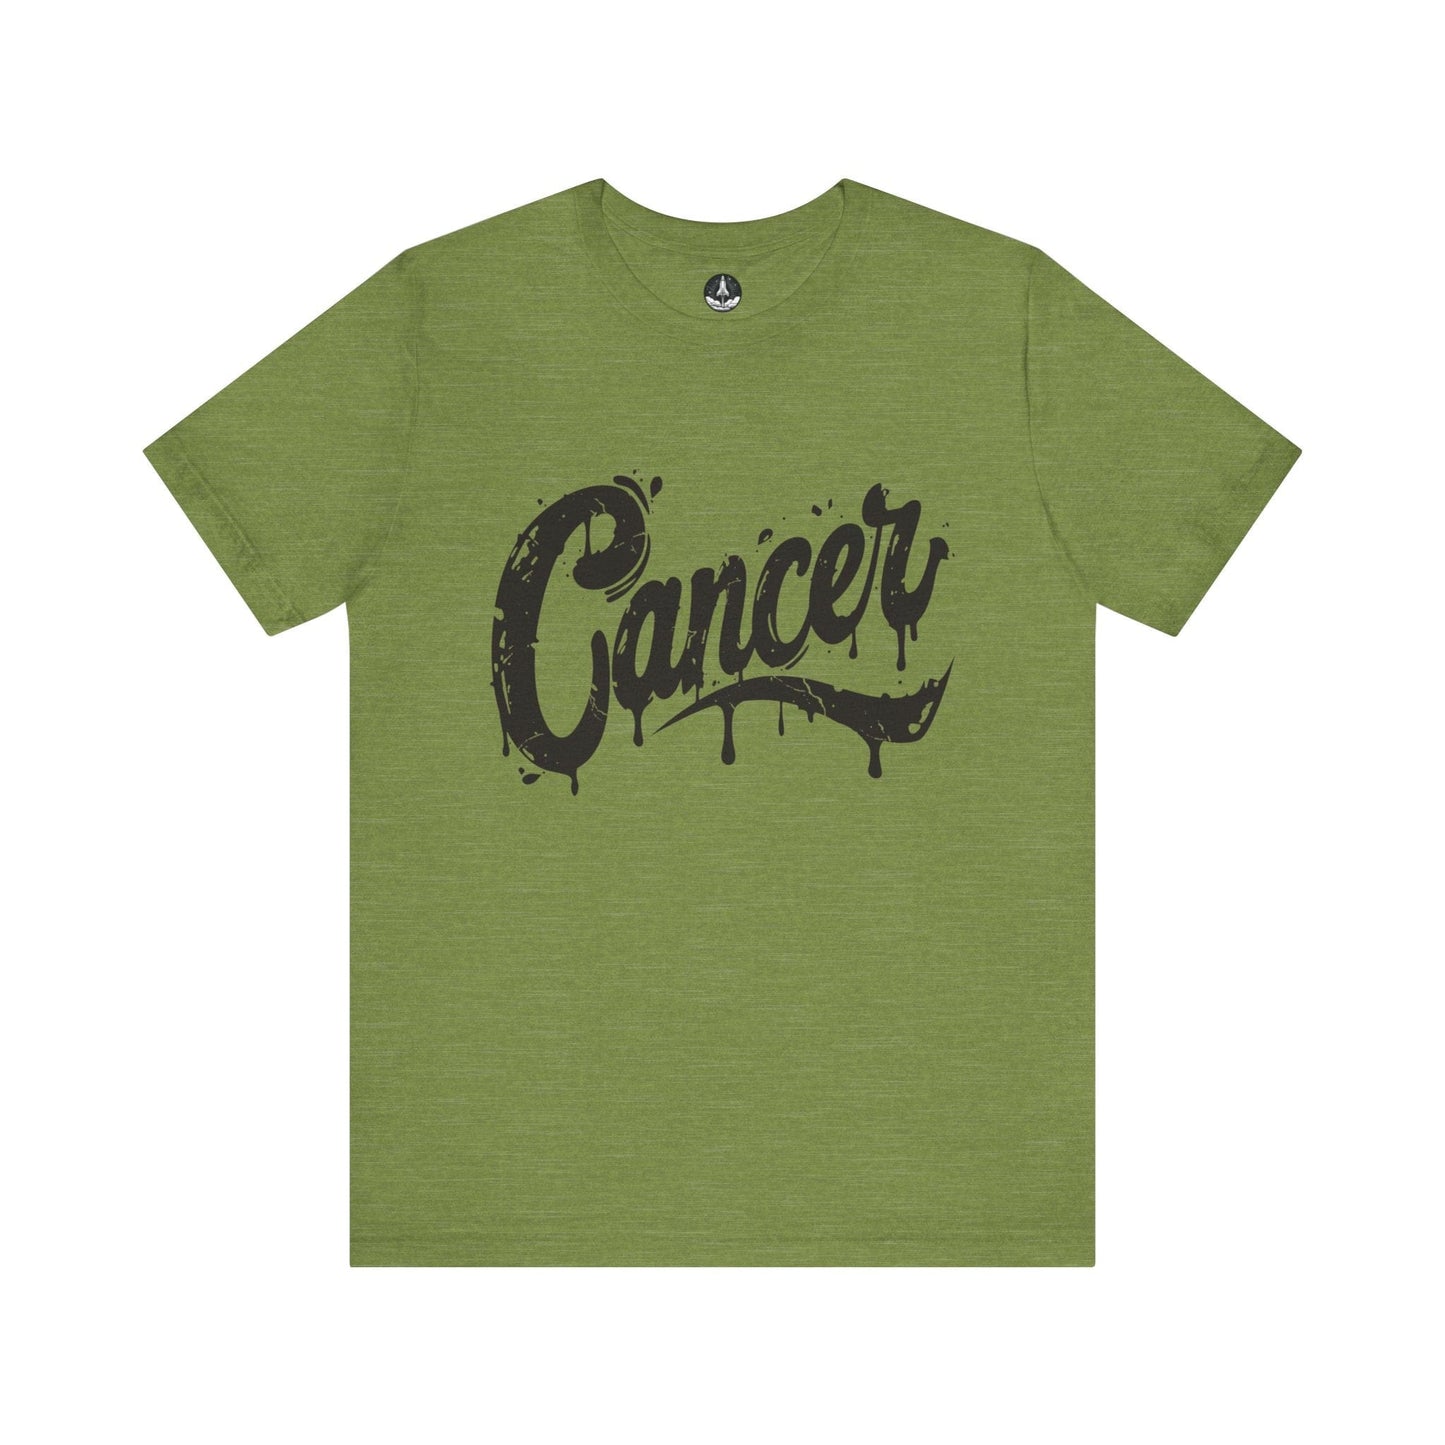 T-Shirt Heather Green / S Tidal Emotion Cancer TShirt: Flow with Feeling